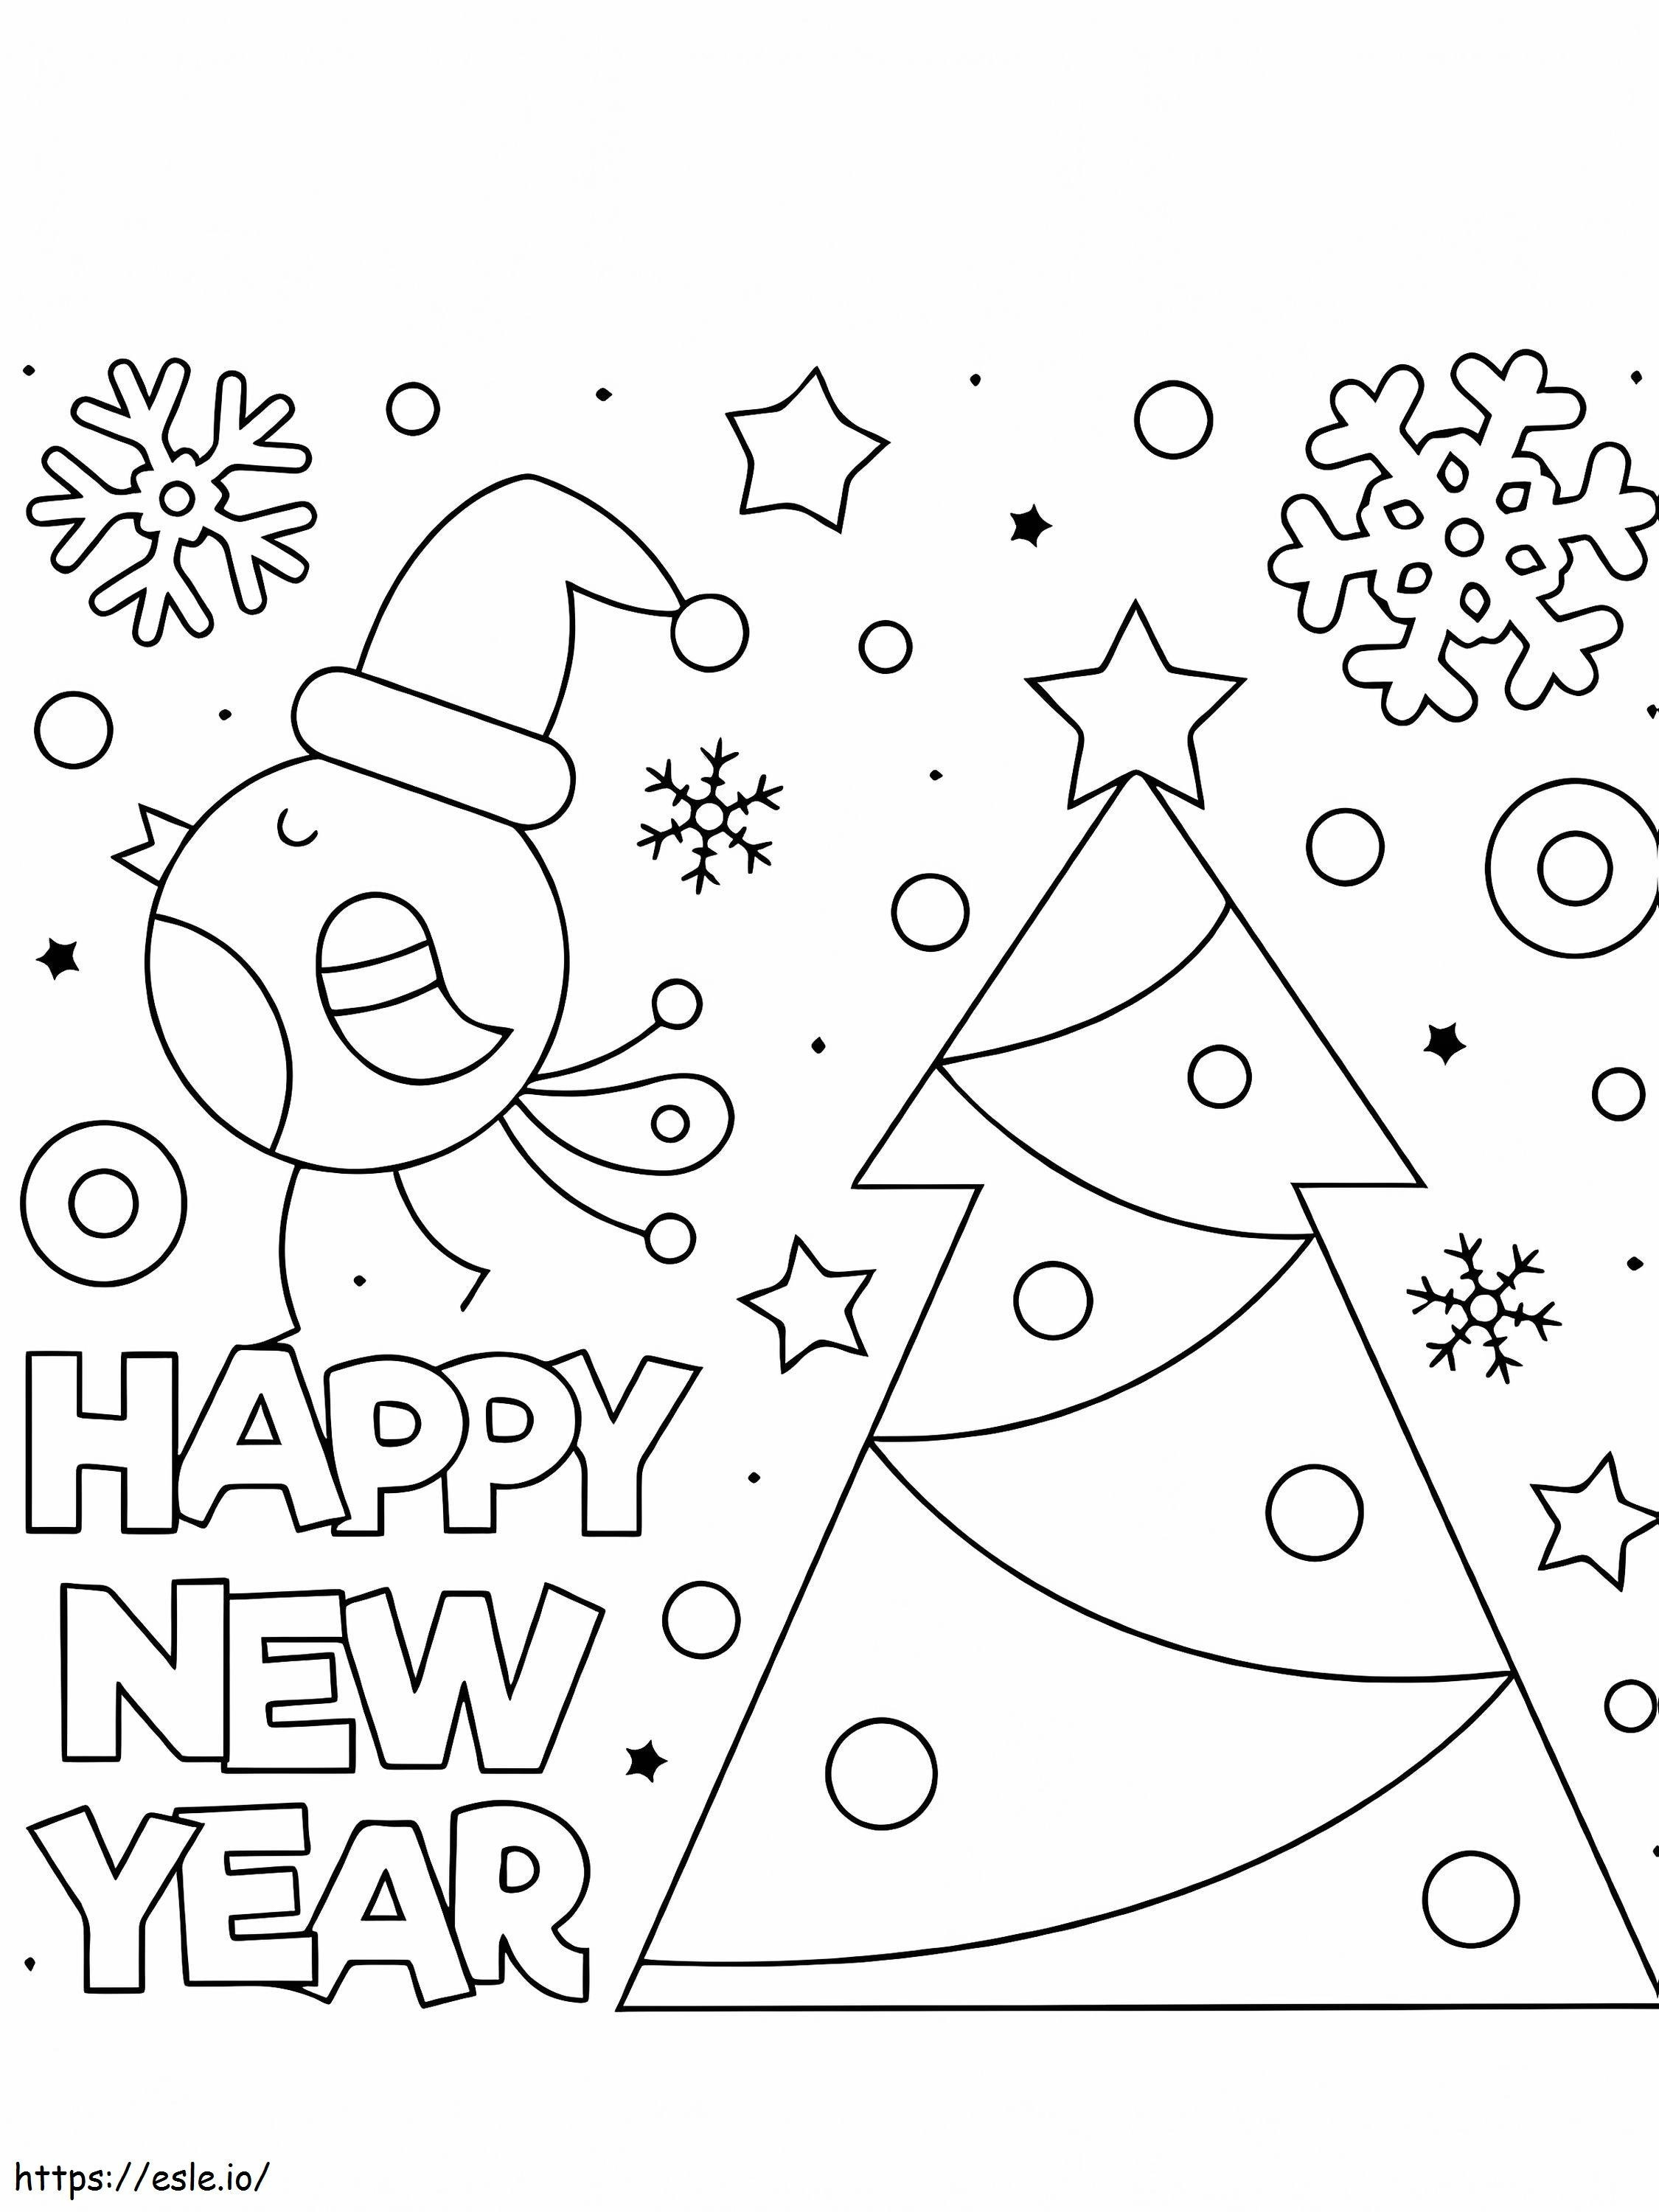 Happy New Year Design Coloring Page coloring page